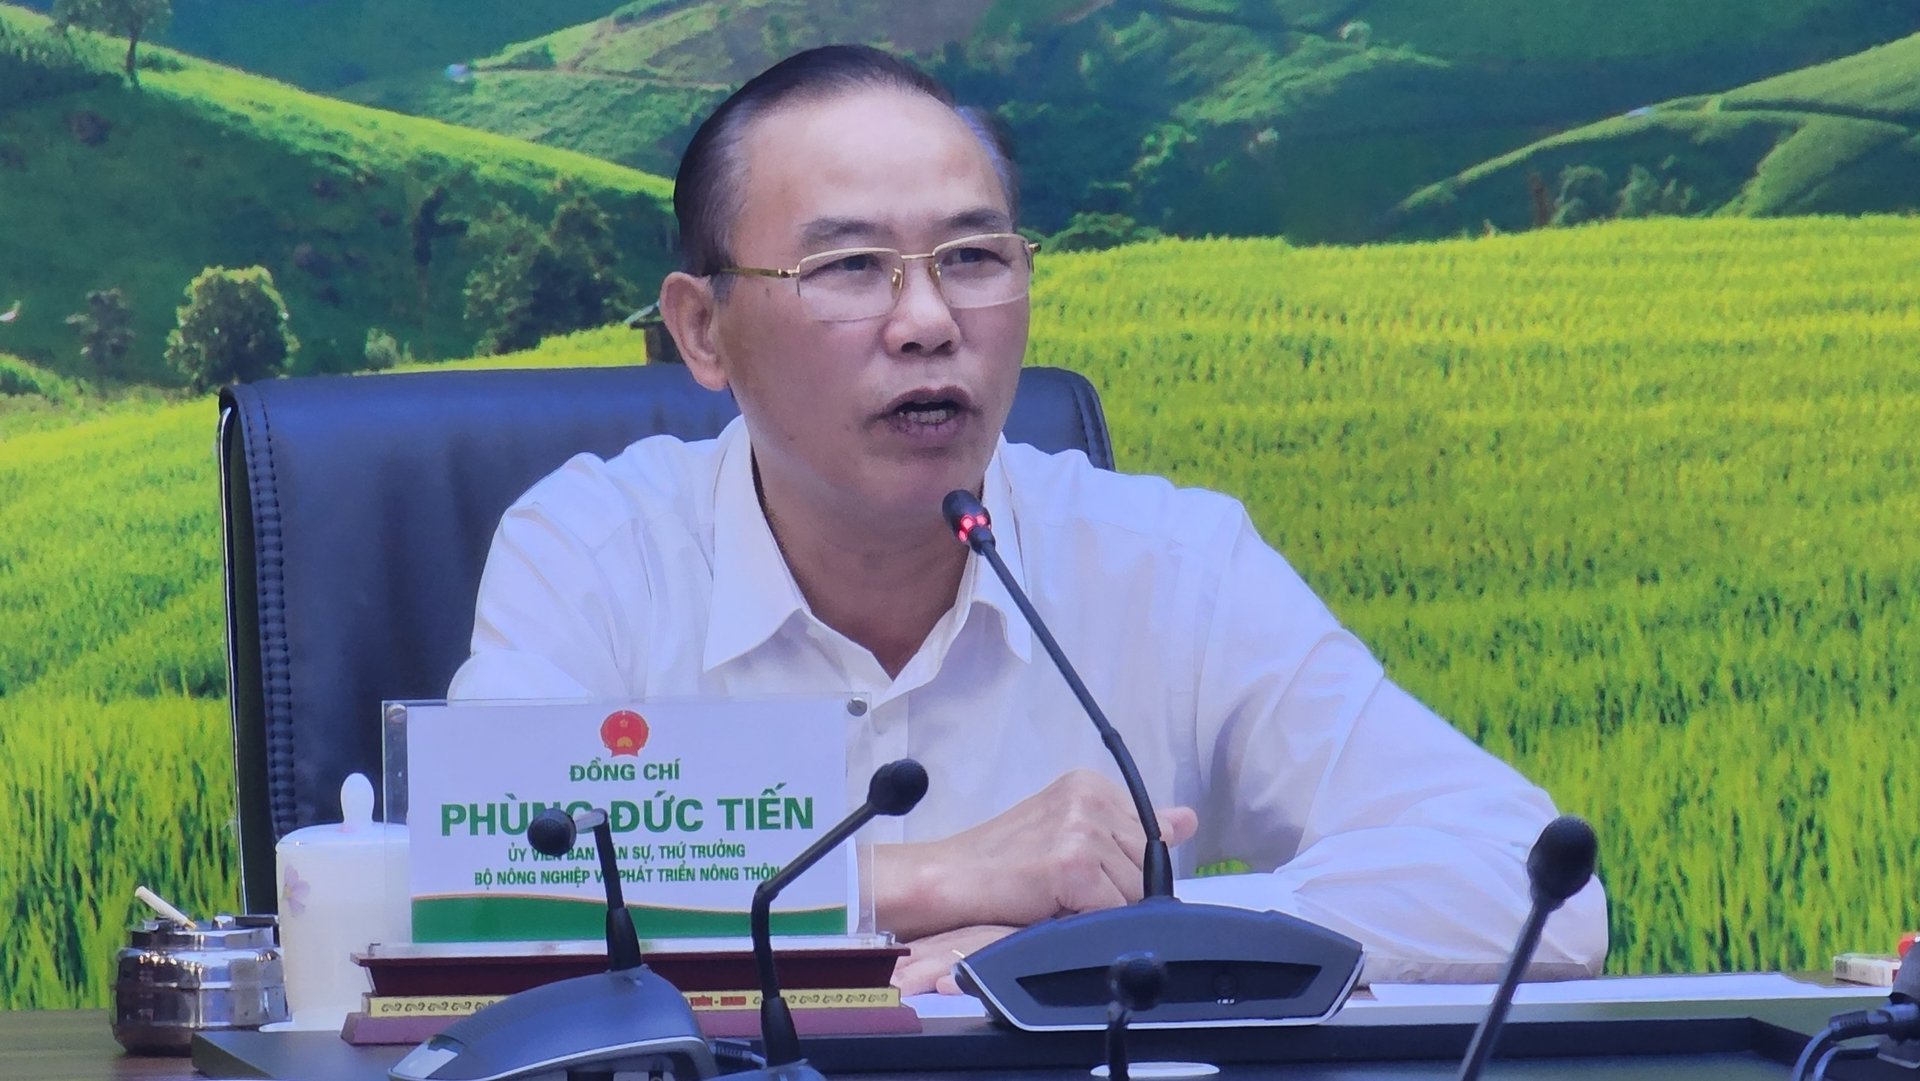 Deputy Minister of the Ministry of Agriculture and Rural Development, Mr. Phung Duc Tien, stated: 'We need to handle this matter seriously so that when the European Commission comes for inspection, they see that Vietnam is genuinely committed and taking real action.' Photo: Quang Dung.